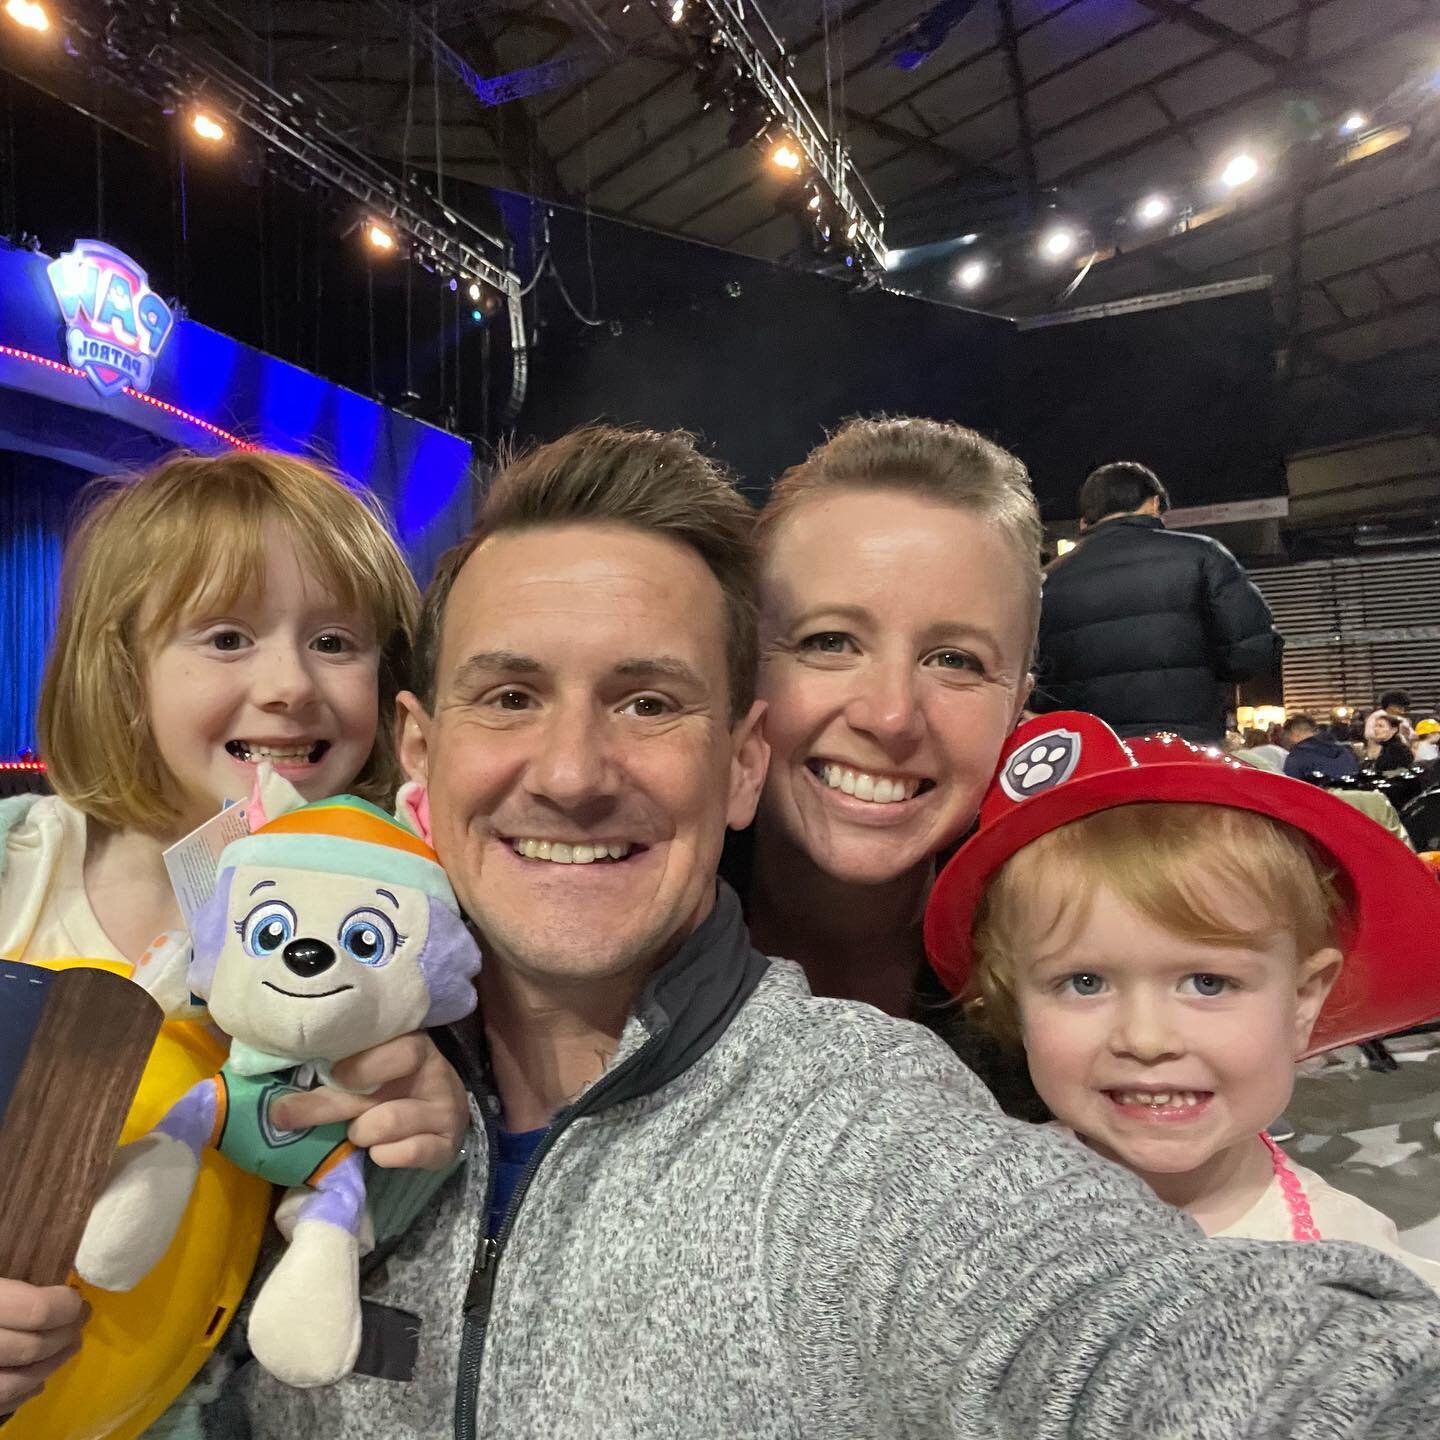 Hope you all had a wonderful Easter weekend. 
We took our little girls to &ldquo;Paw Patrol Live&rdquo; in Tacoma. A fantastic production for the littles. I was over them moon seeing there faces light up the way they did when there favorite character